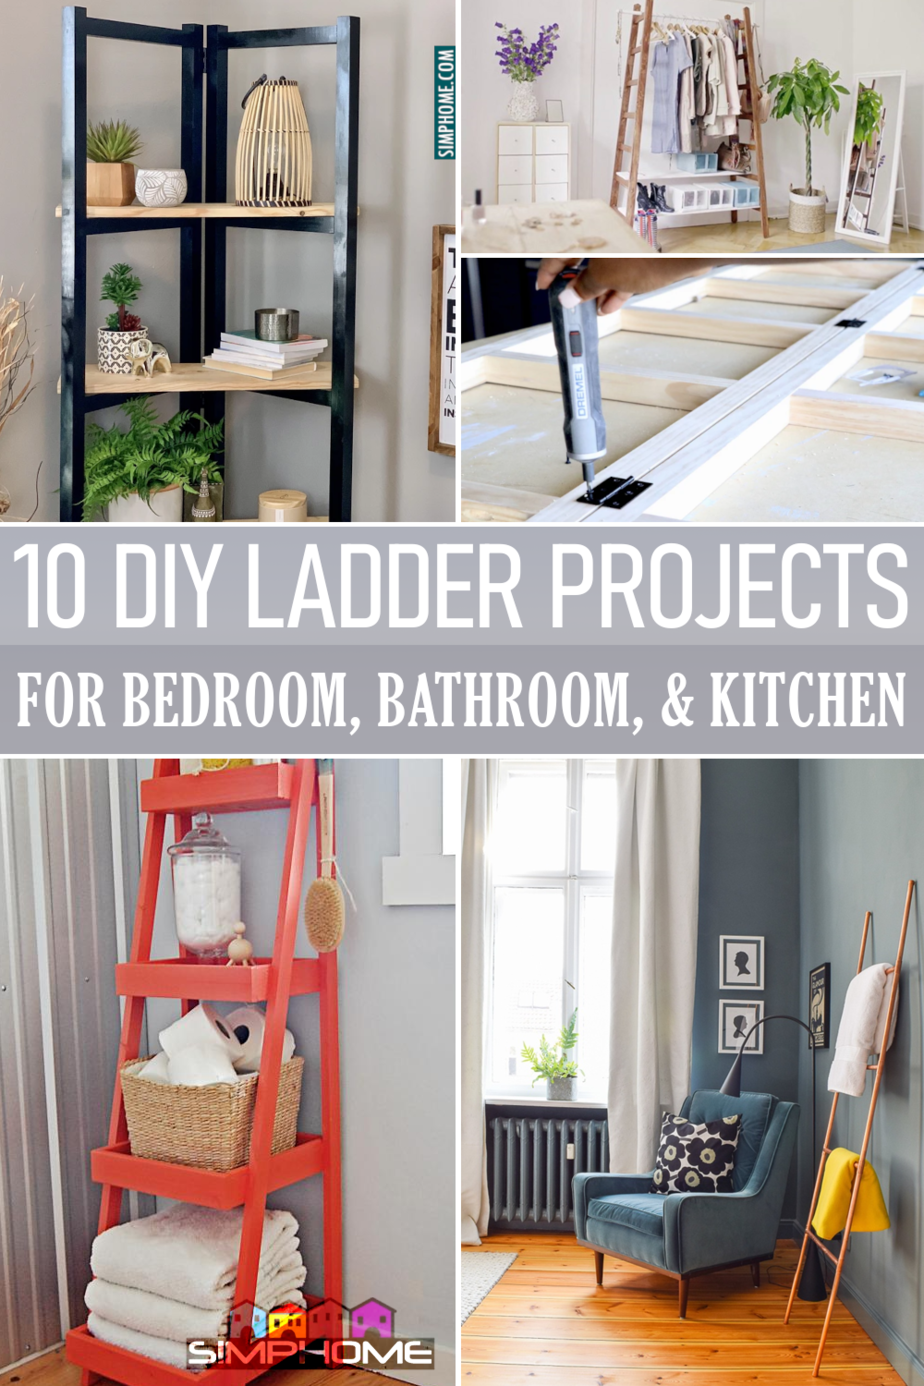 10 DIY Ladder Project Ideas for Your Bedroom Bathroom and Kitchen via Simphome.comFeatured